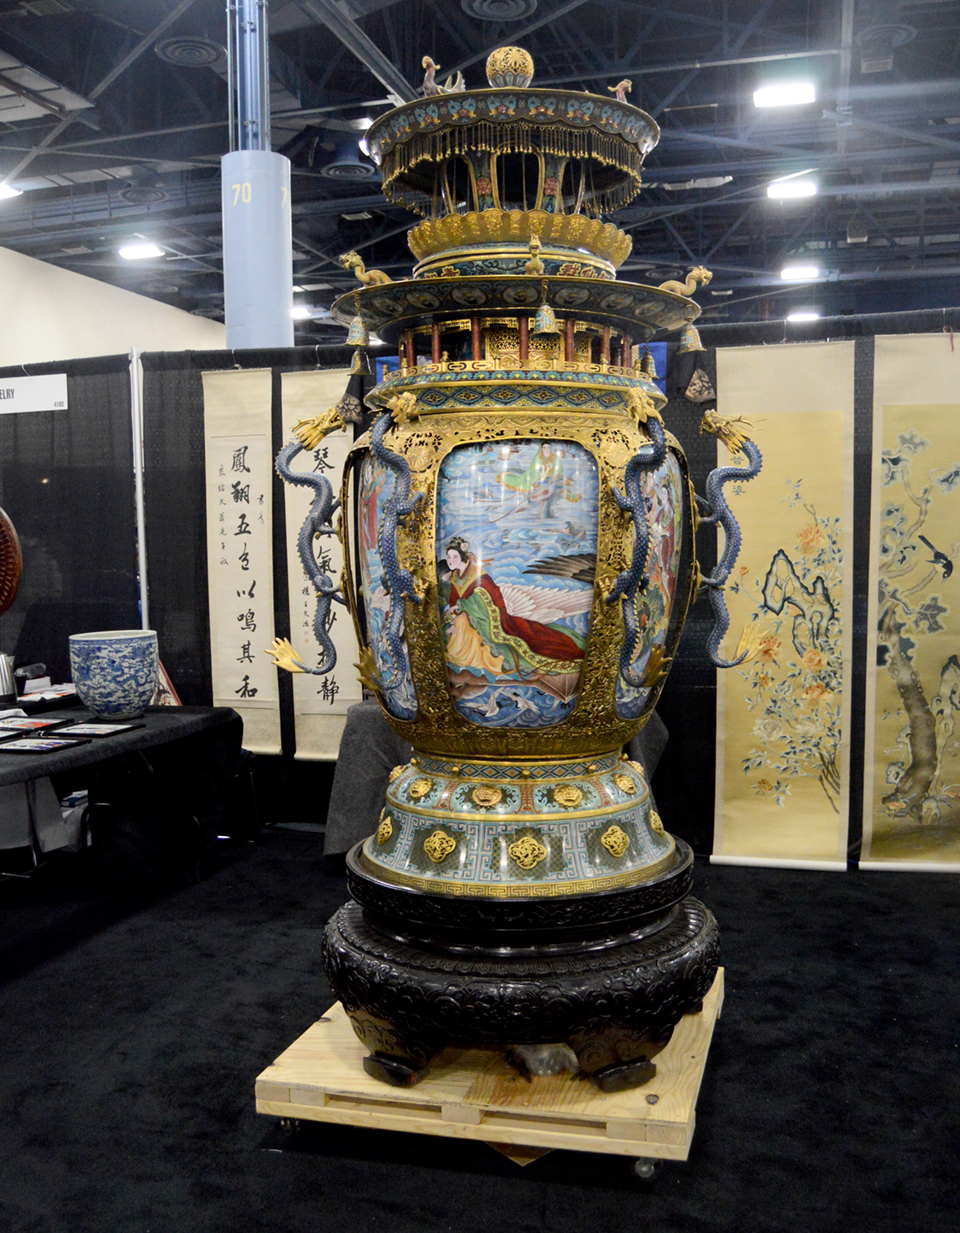 A palace-sized urn was a standout at Altair-Norwood, Norwood, Mass.